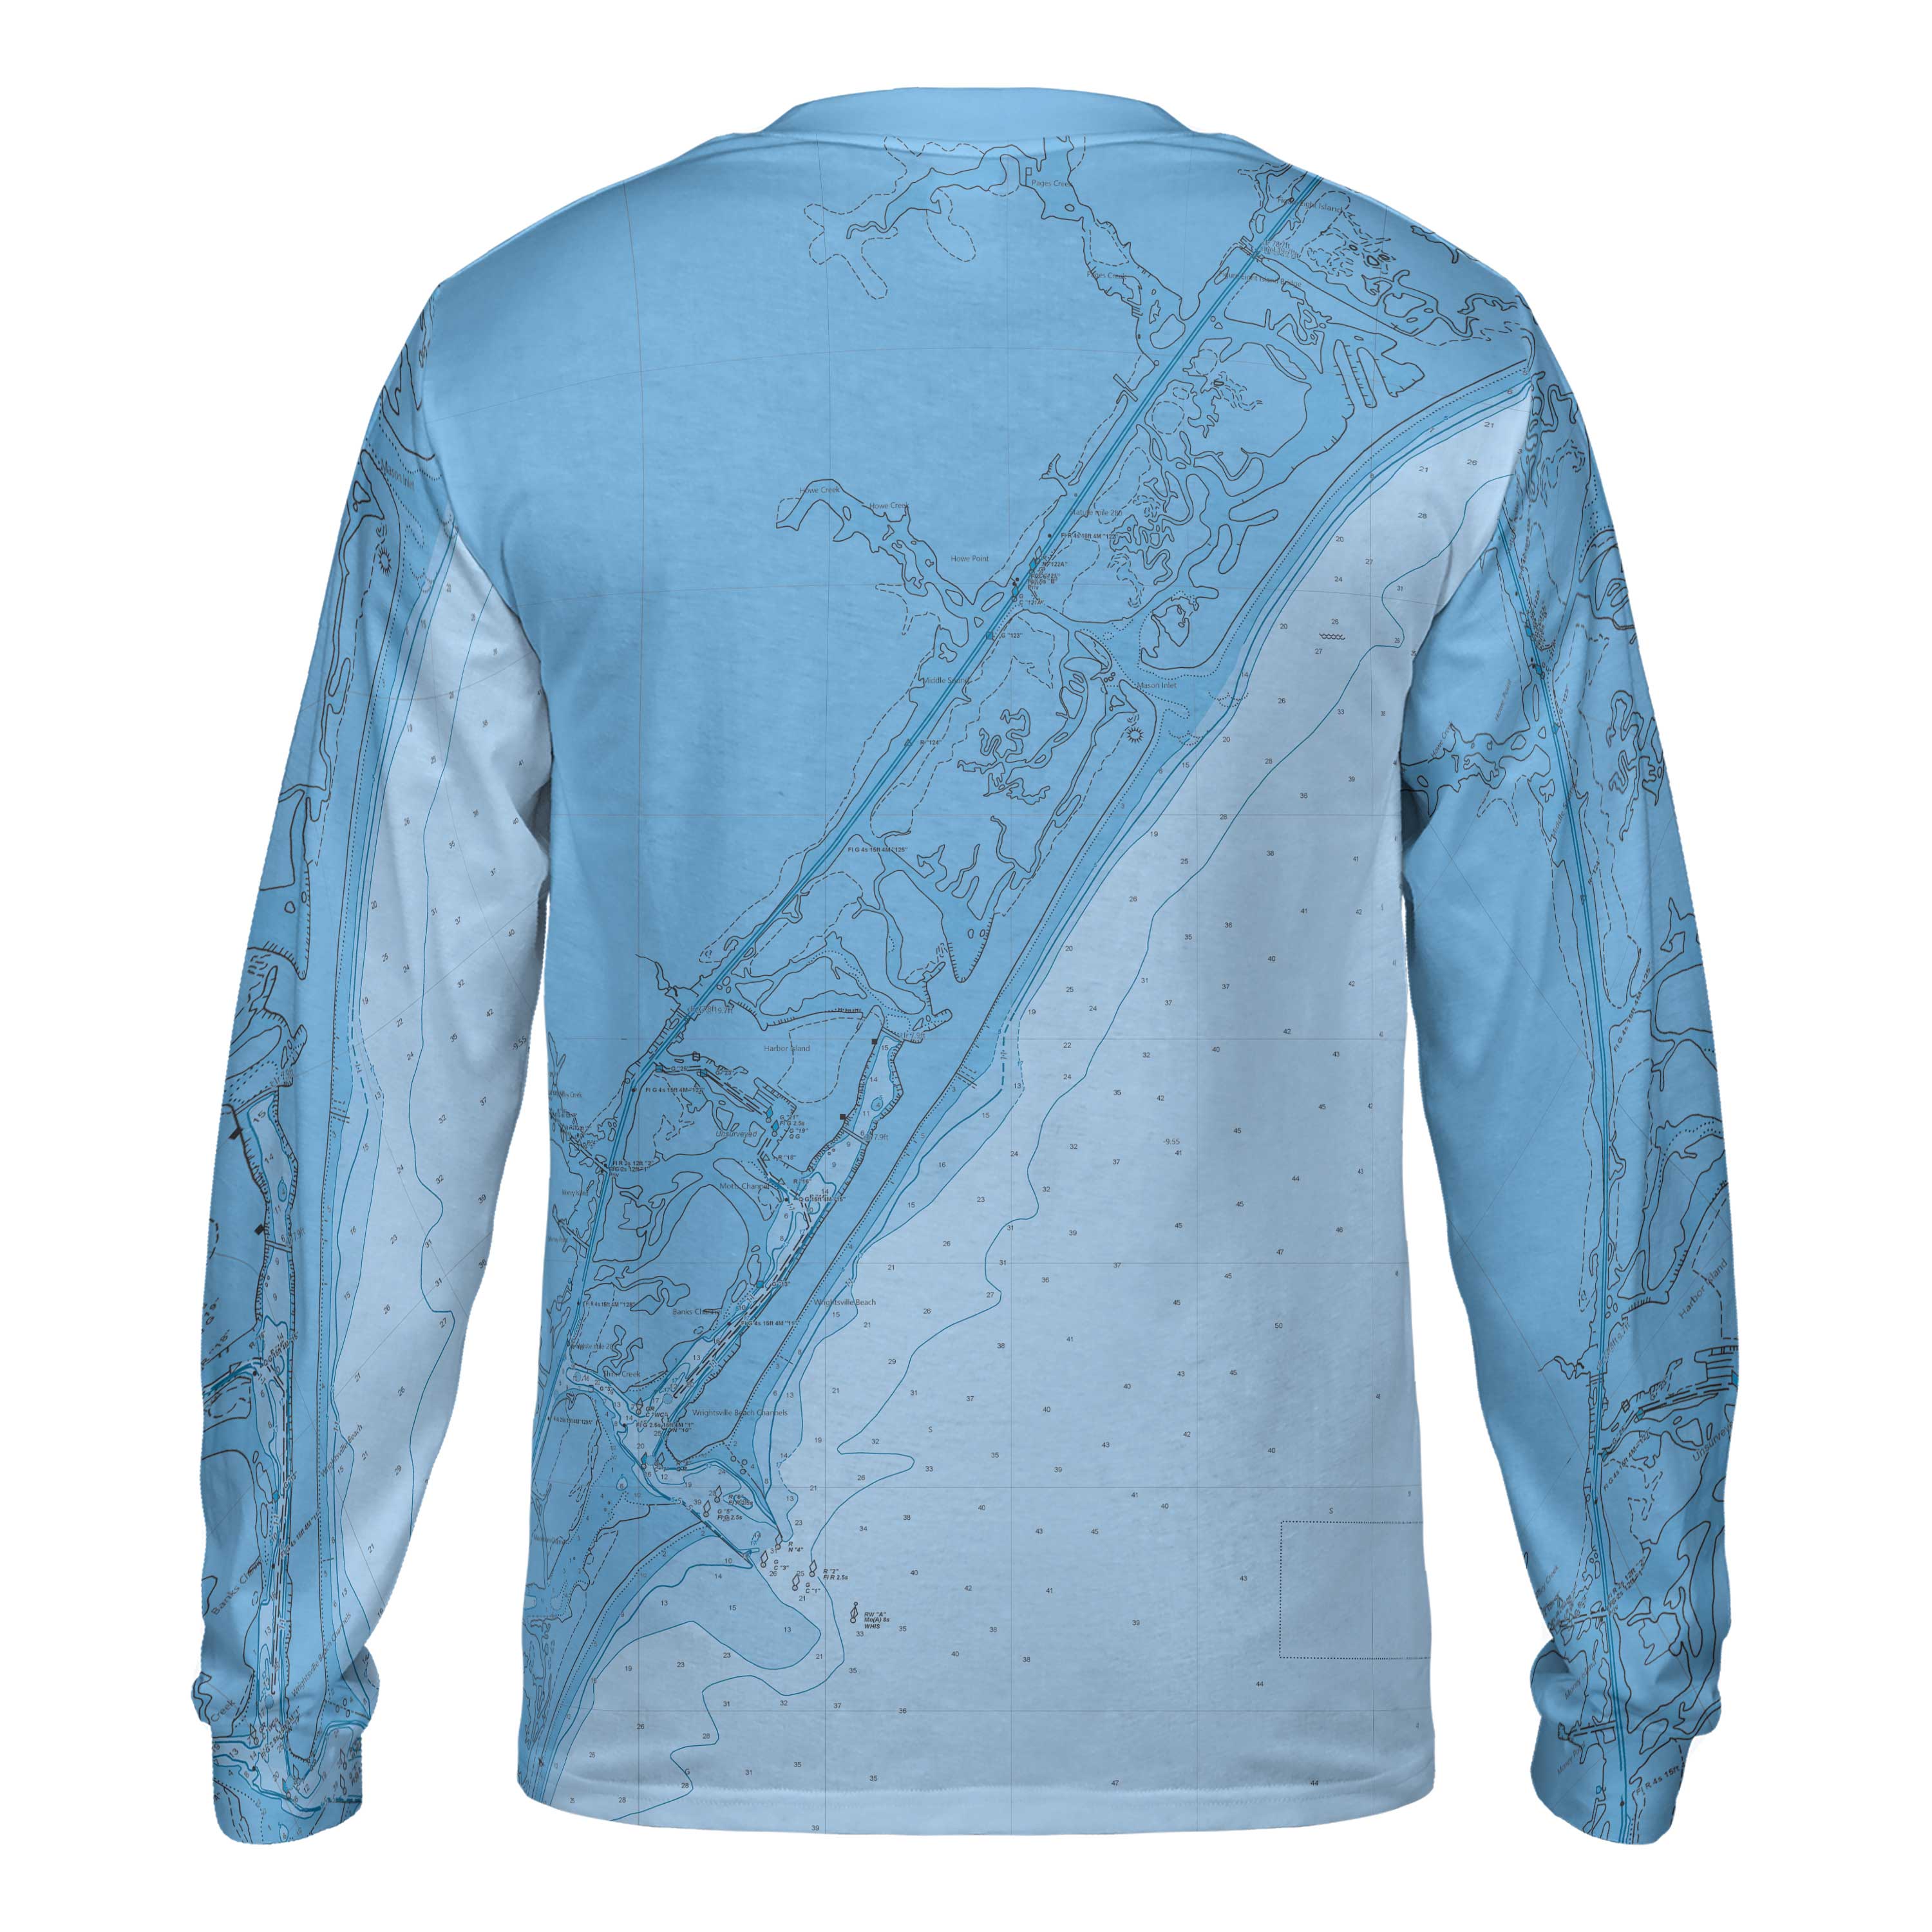 The North Carolina Collection – Top Deck Gear